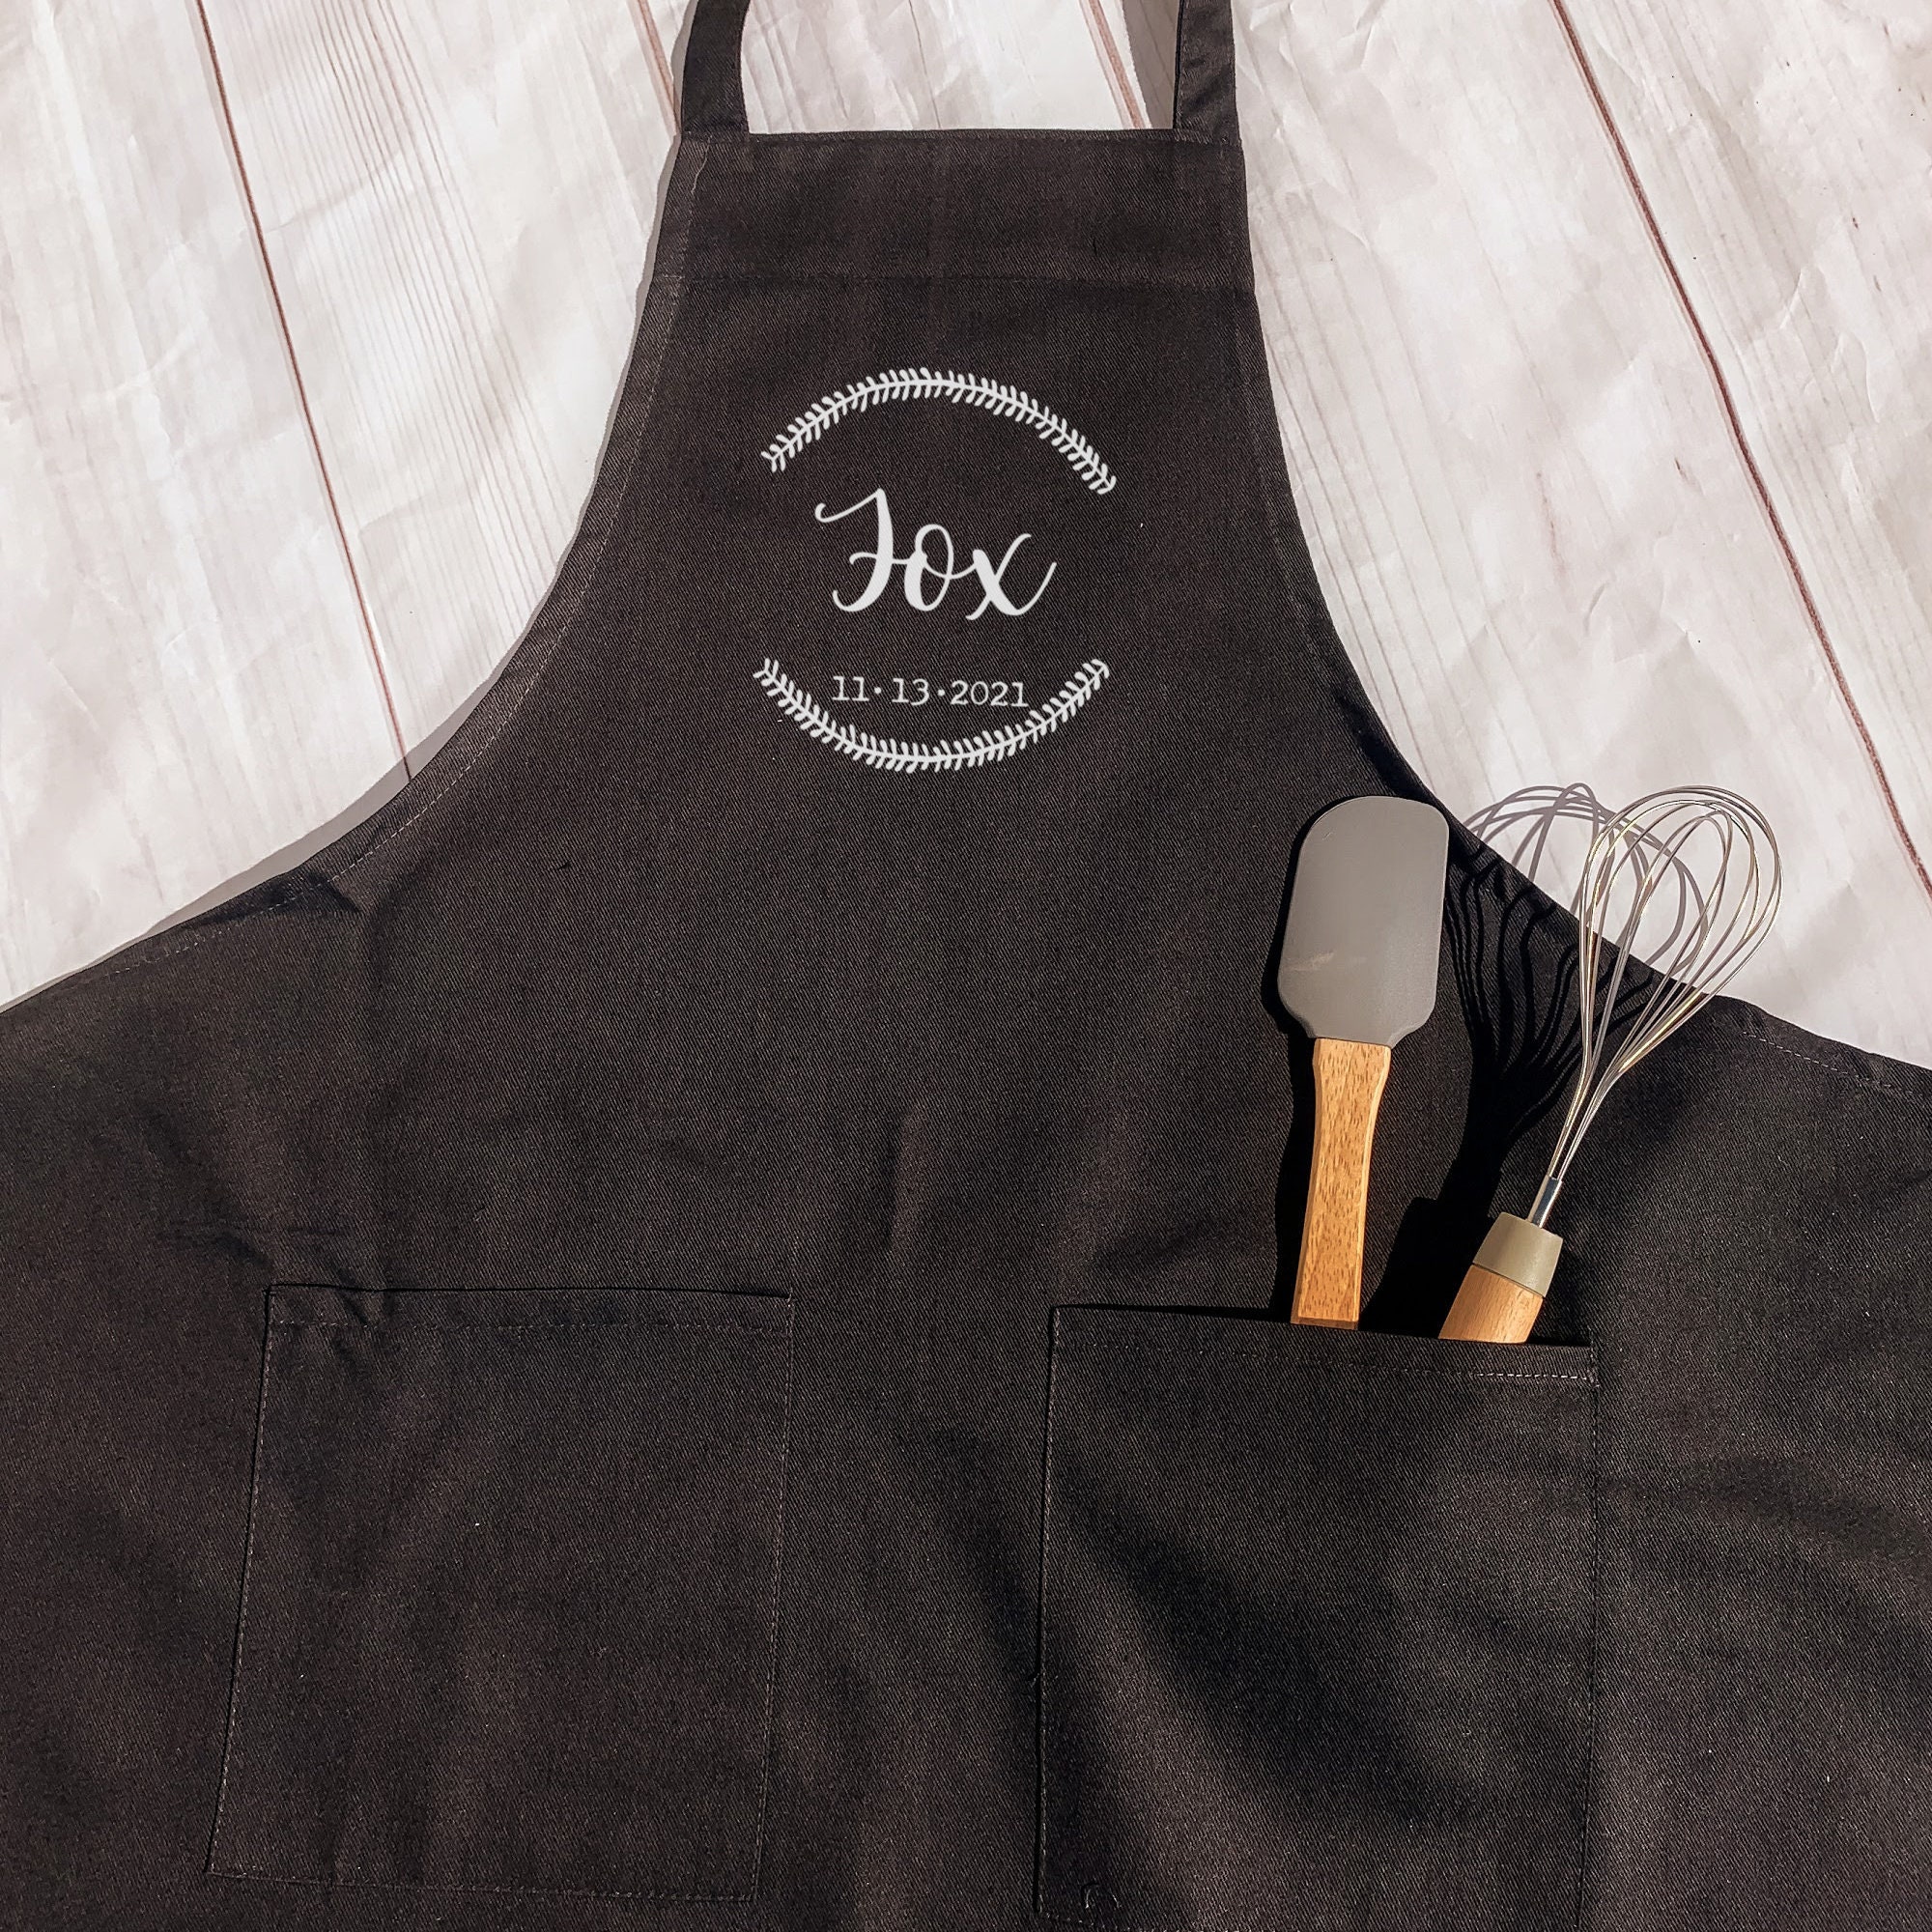 Last Name With Date Apron Personalized Apron Any Name Apron